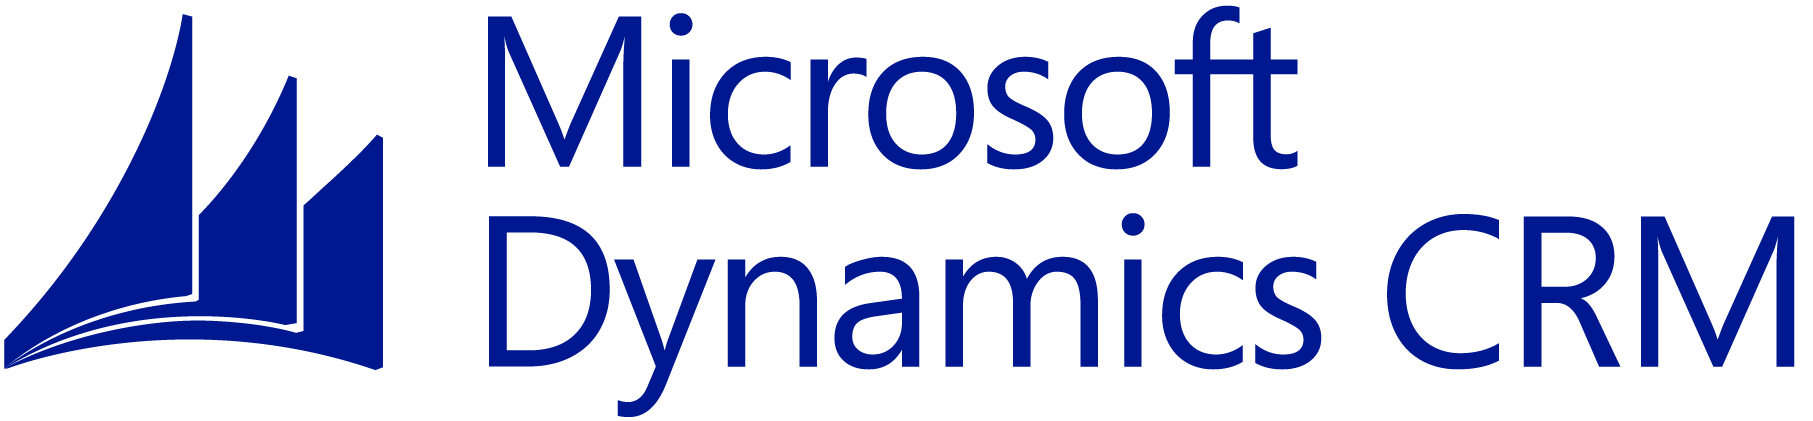 MS Dynamics CRM Logo - Microsoft Dynamics CRM 2011 Update Rollup 16 Consulting